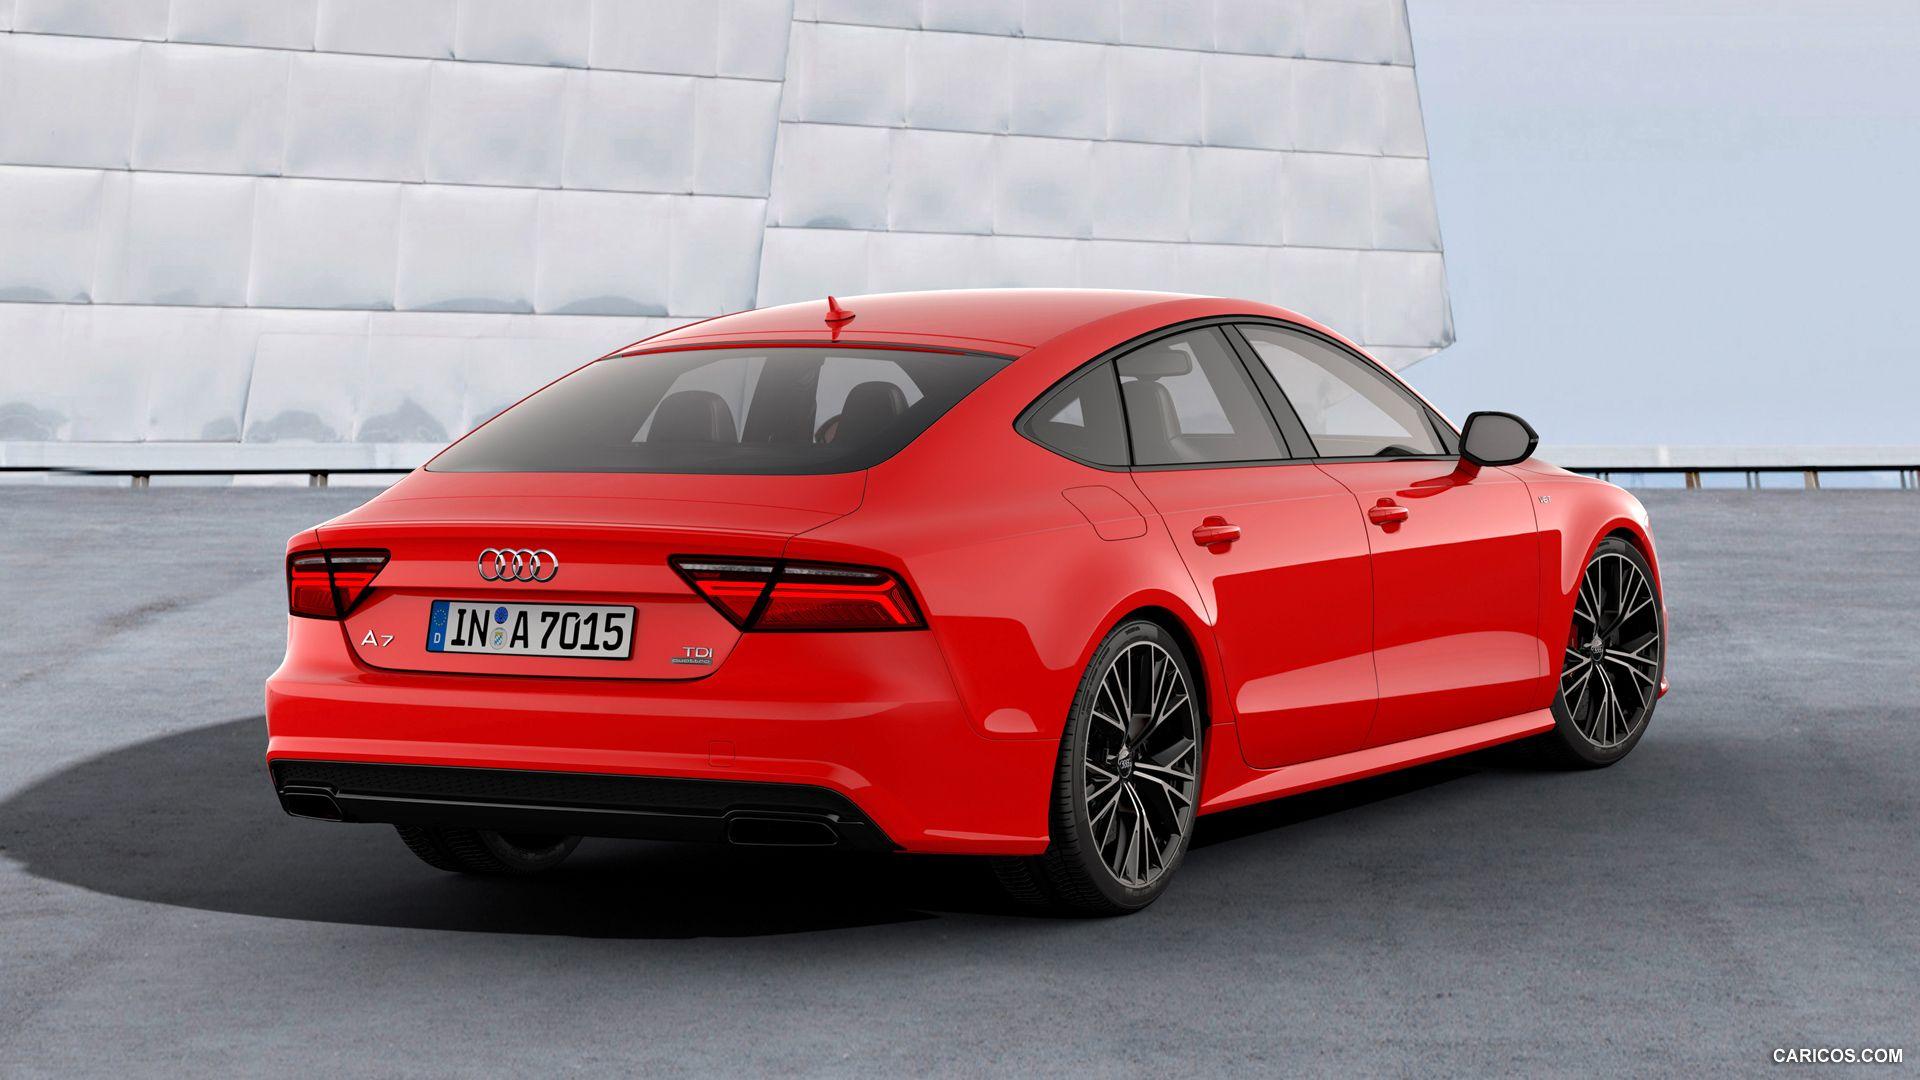 Red Audi A7 Wallpapers Top Free Red Audi A7 Backgrounds Wallpaperaccess